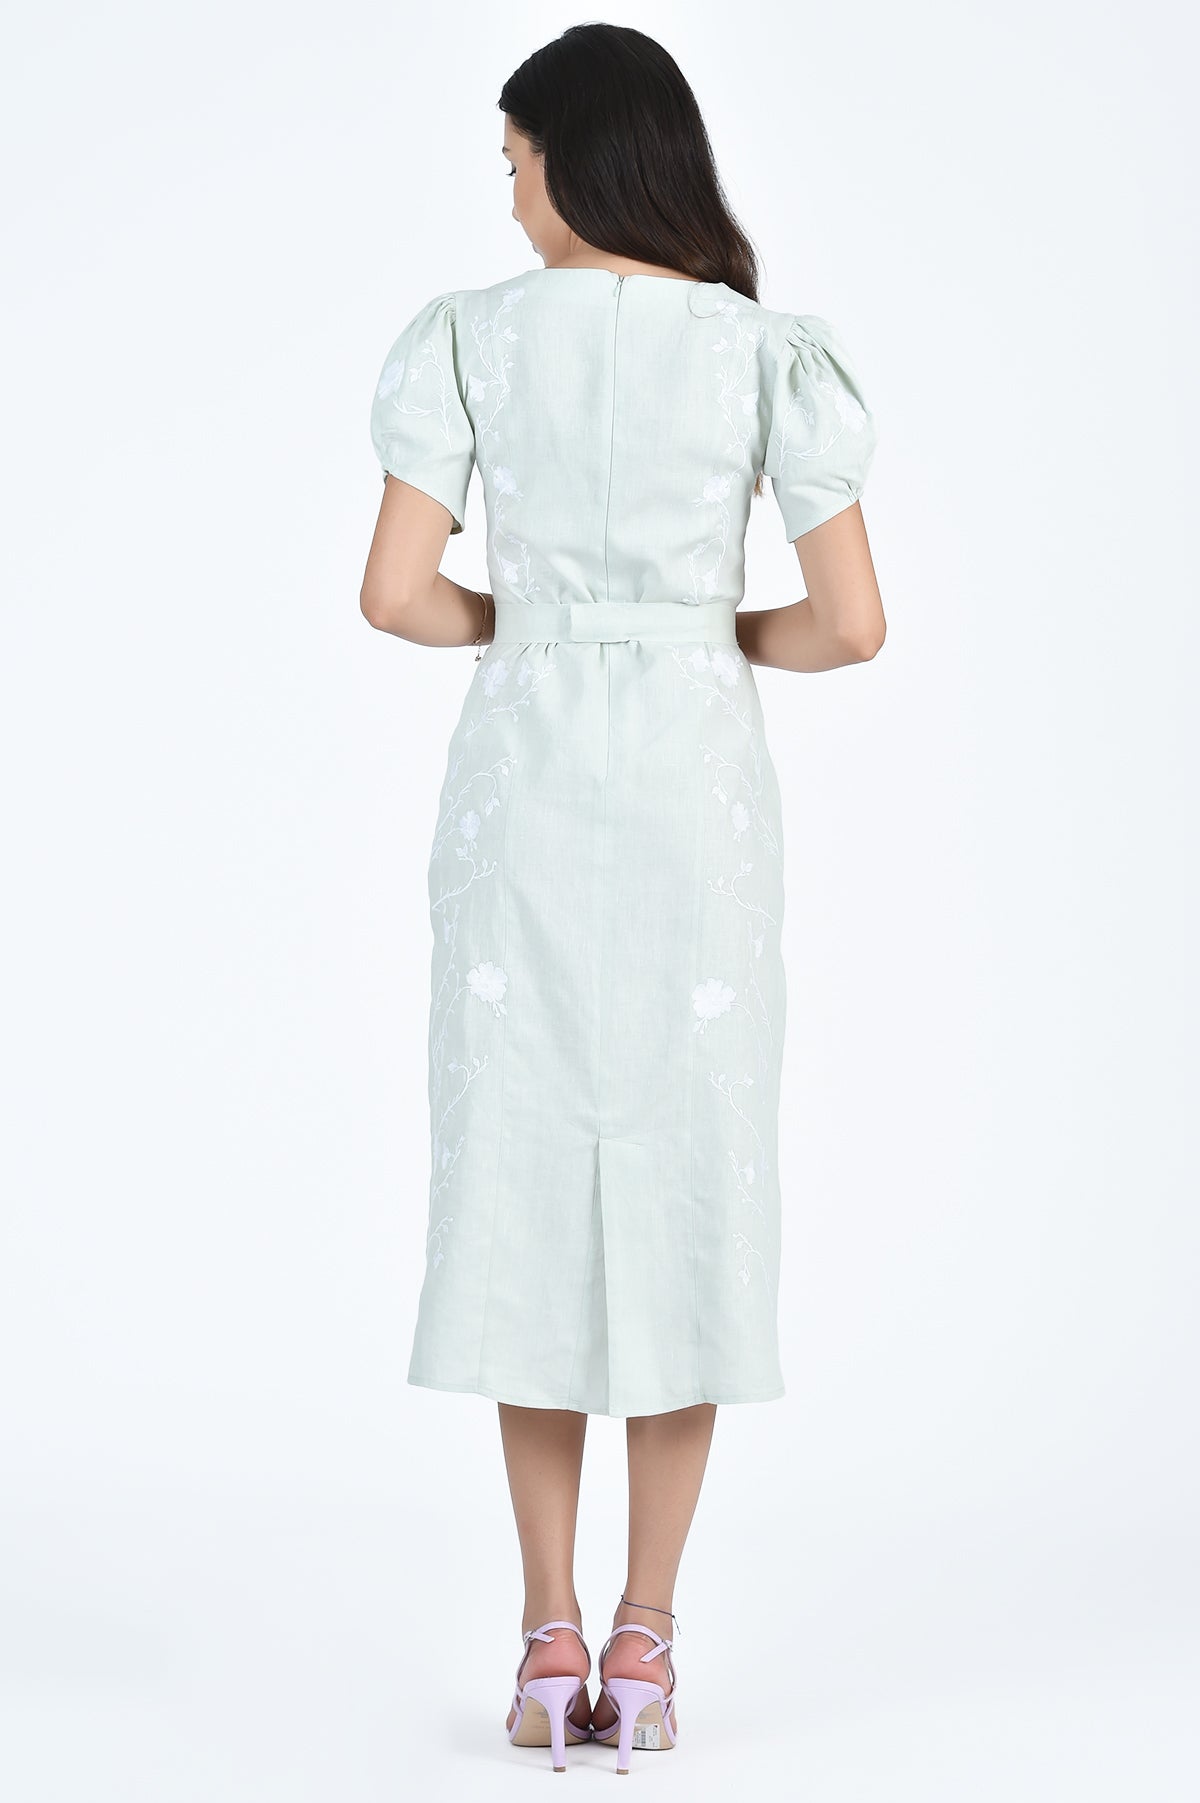 Quinn 100% Cotton Dress Back View with Removable Belt Shown